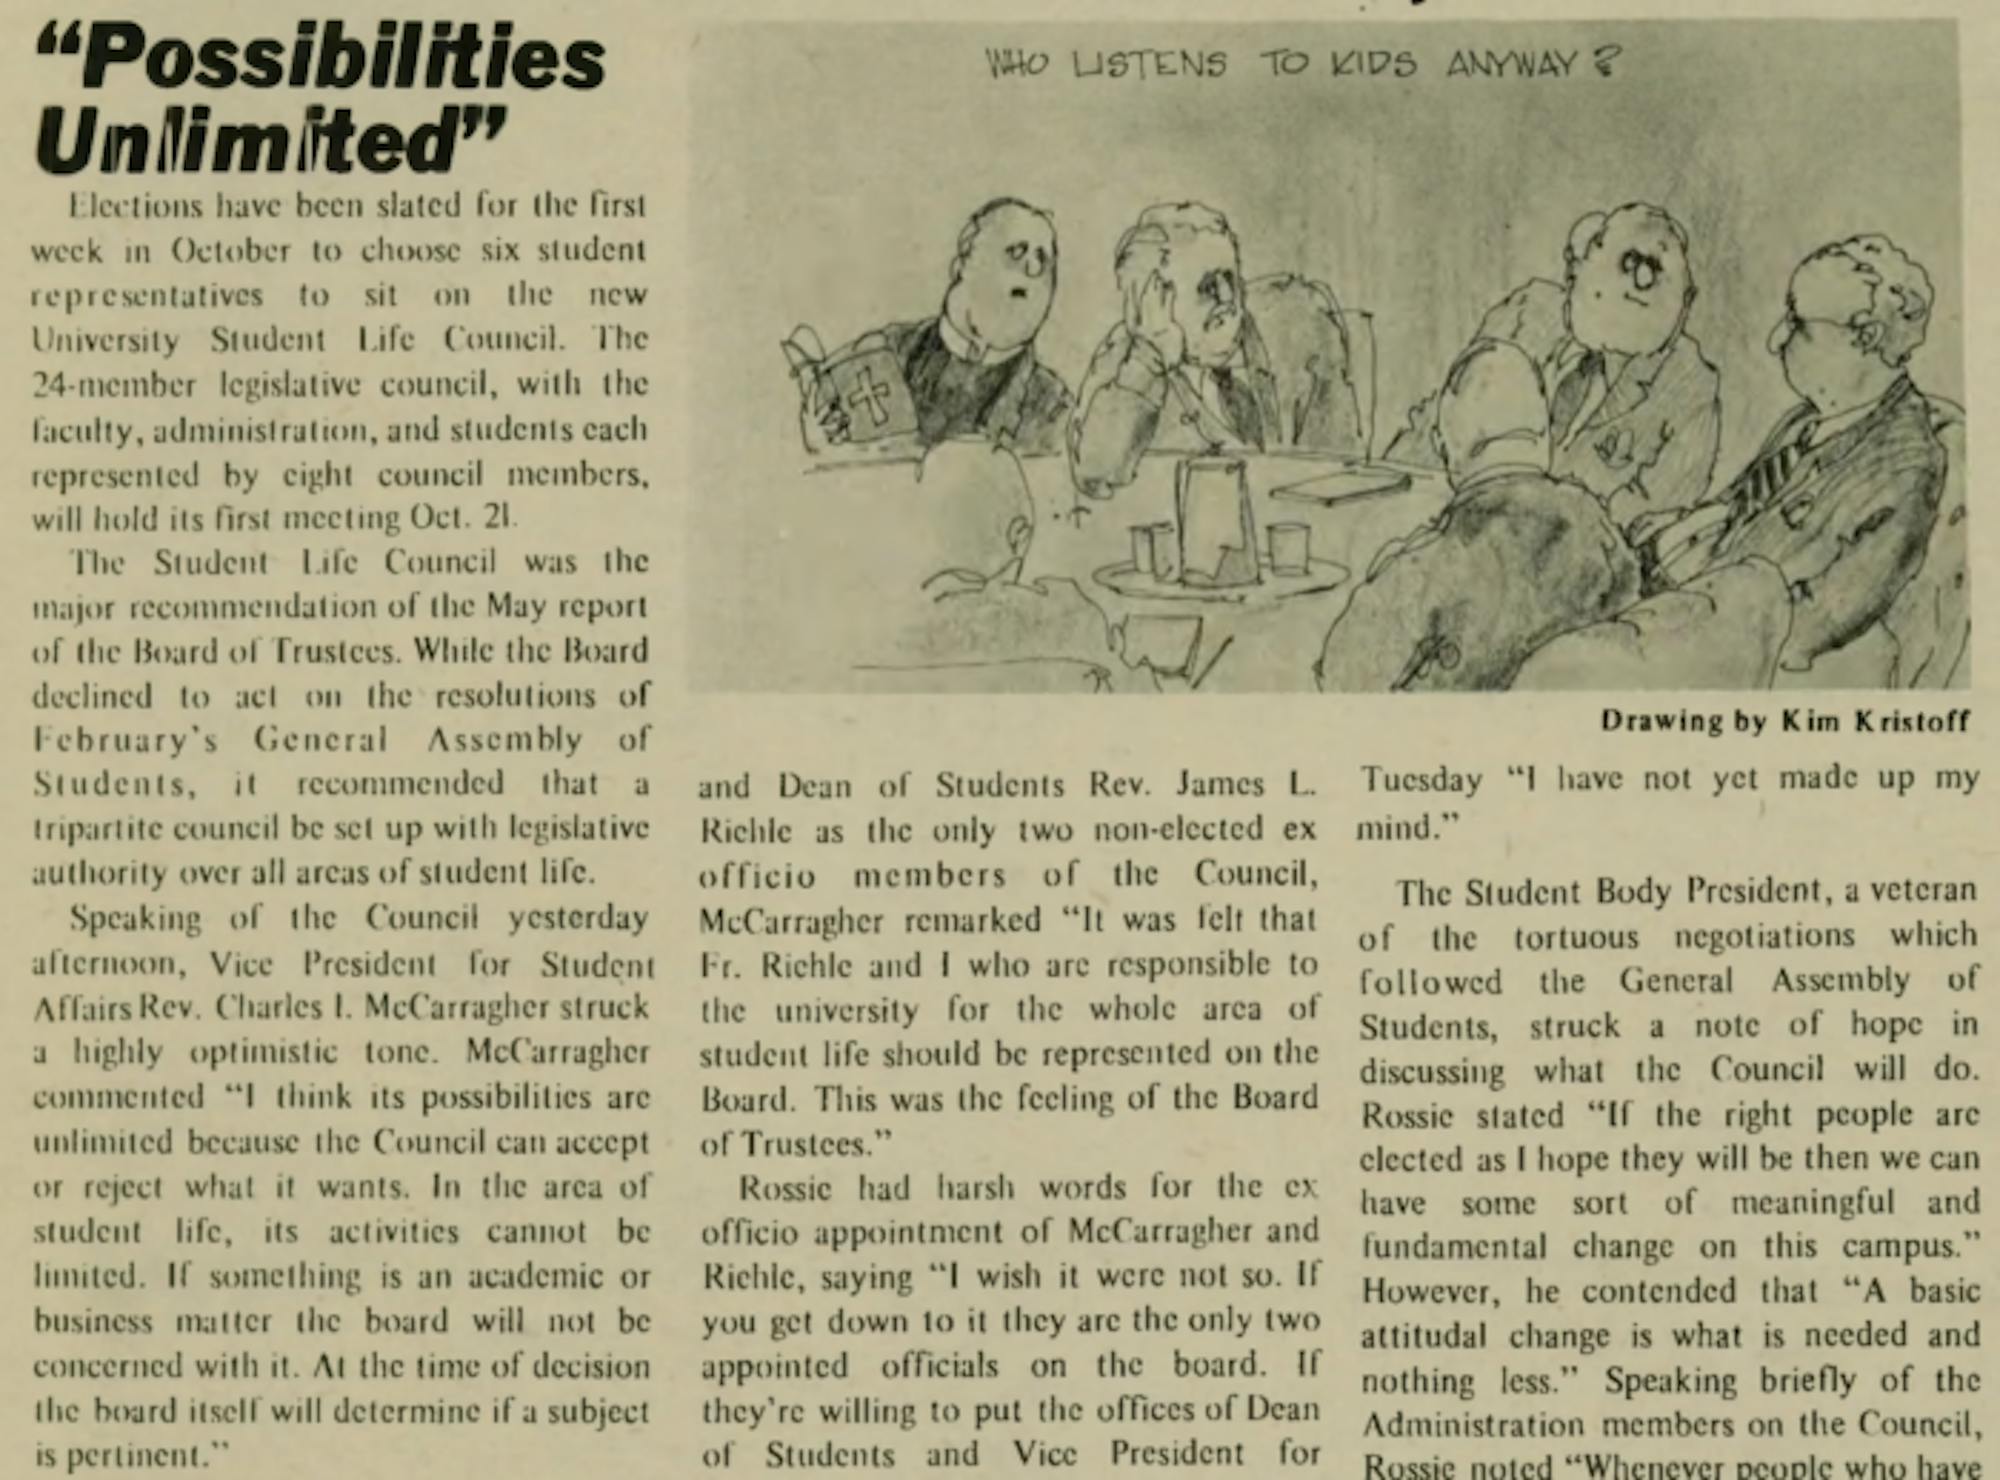 The Sep. 18, 1968 front page of The Observer discusses the formation of the Student Life Council and explores its motives with a comic.